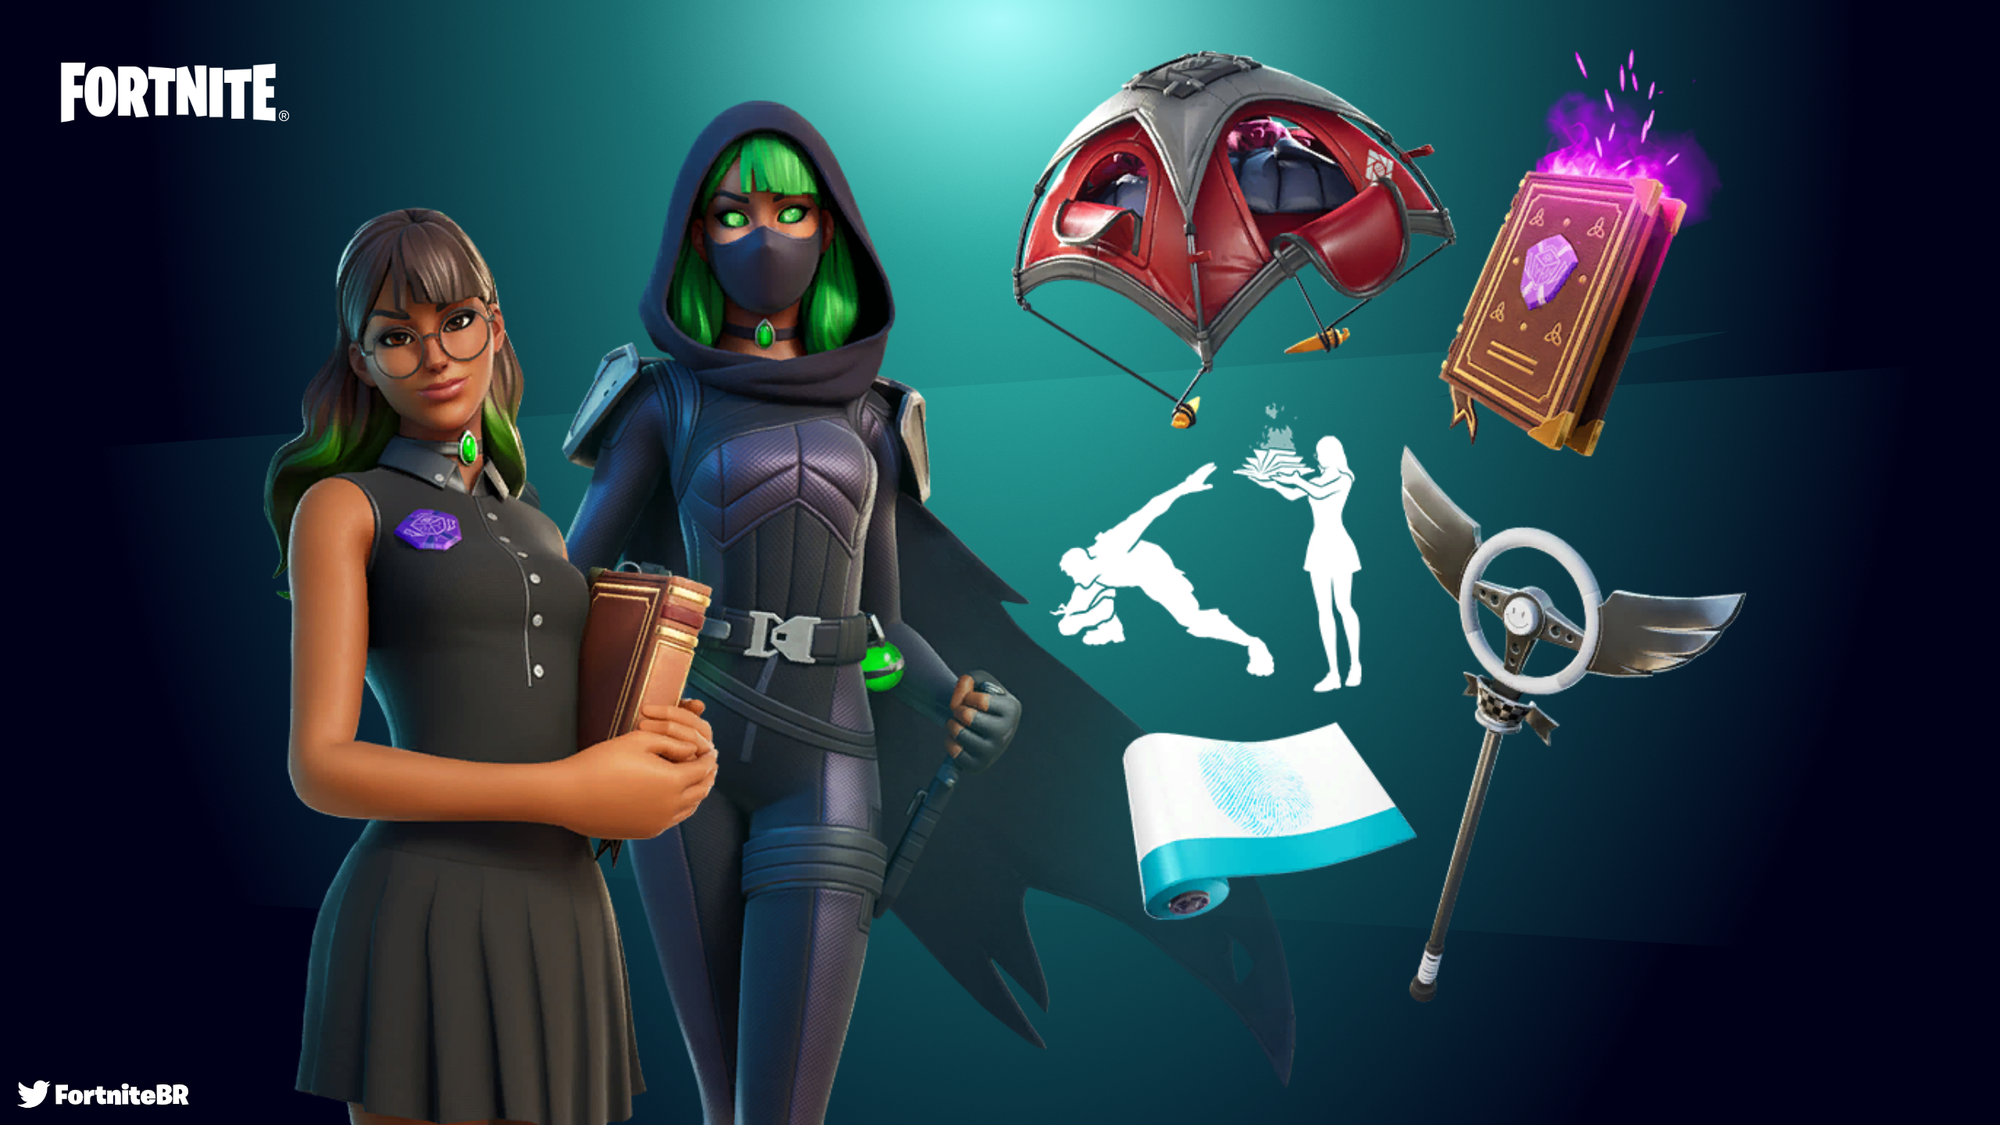 Leaked Item Shop - May 3, 2023